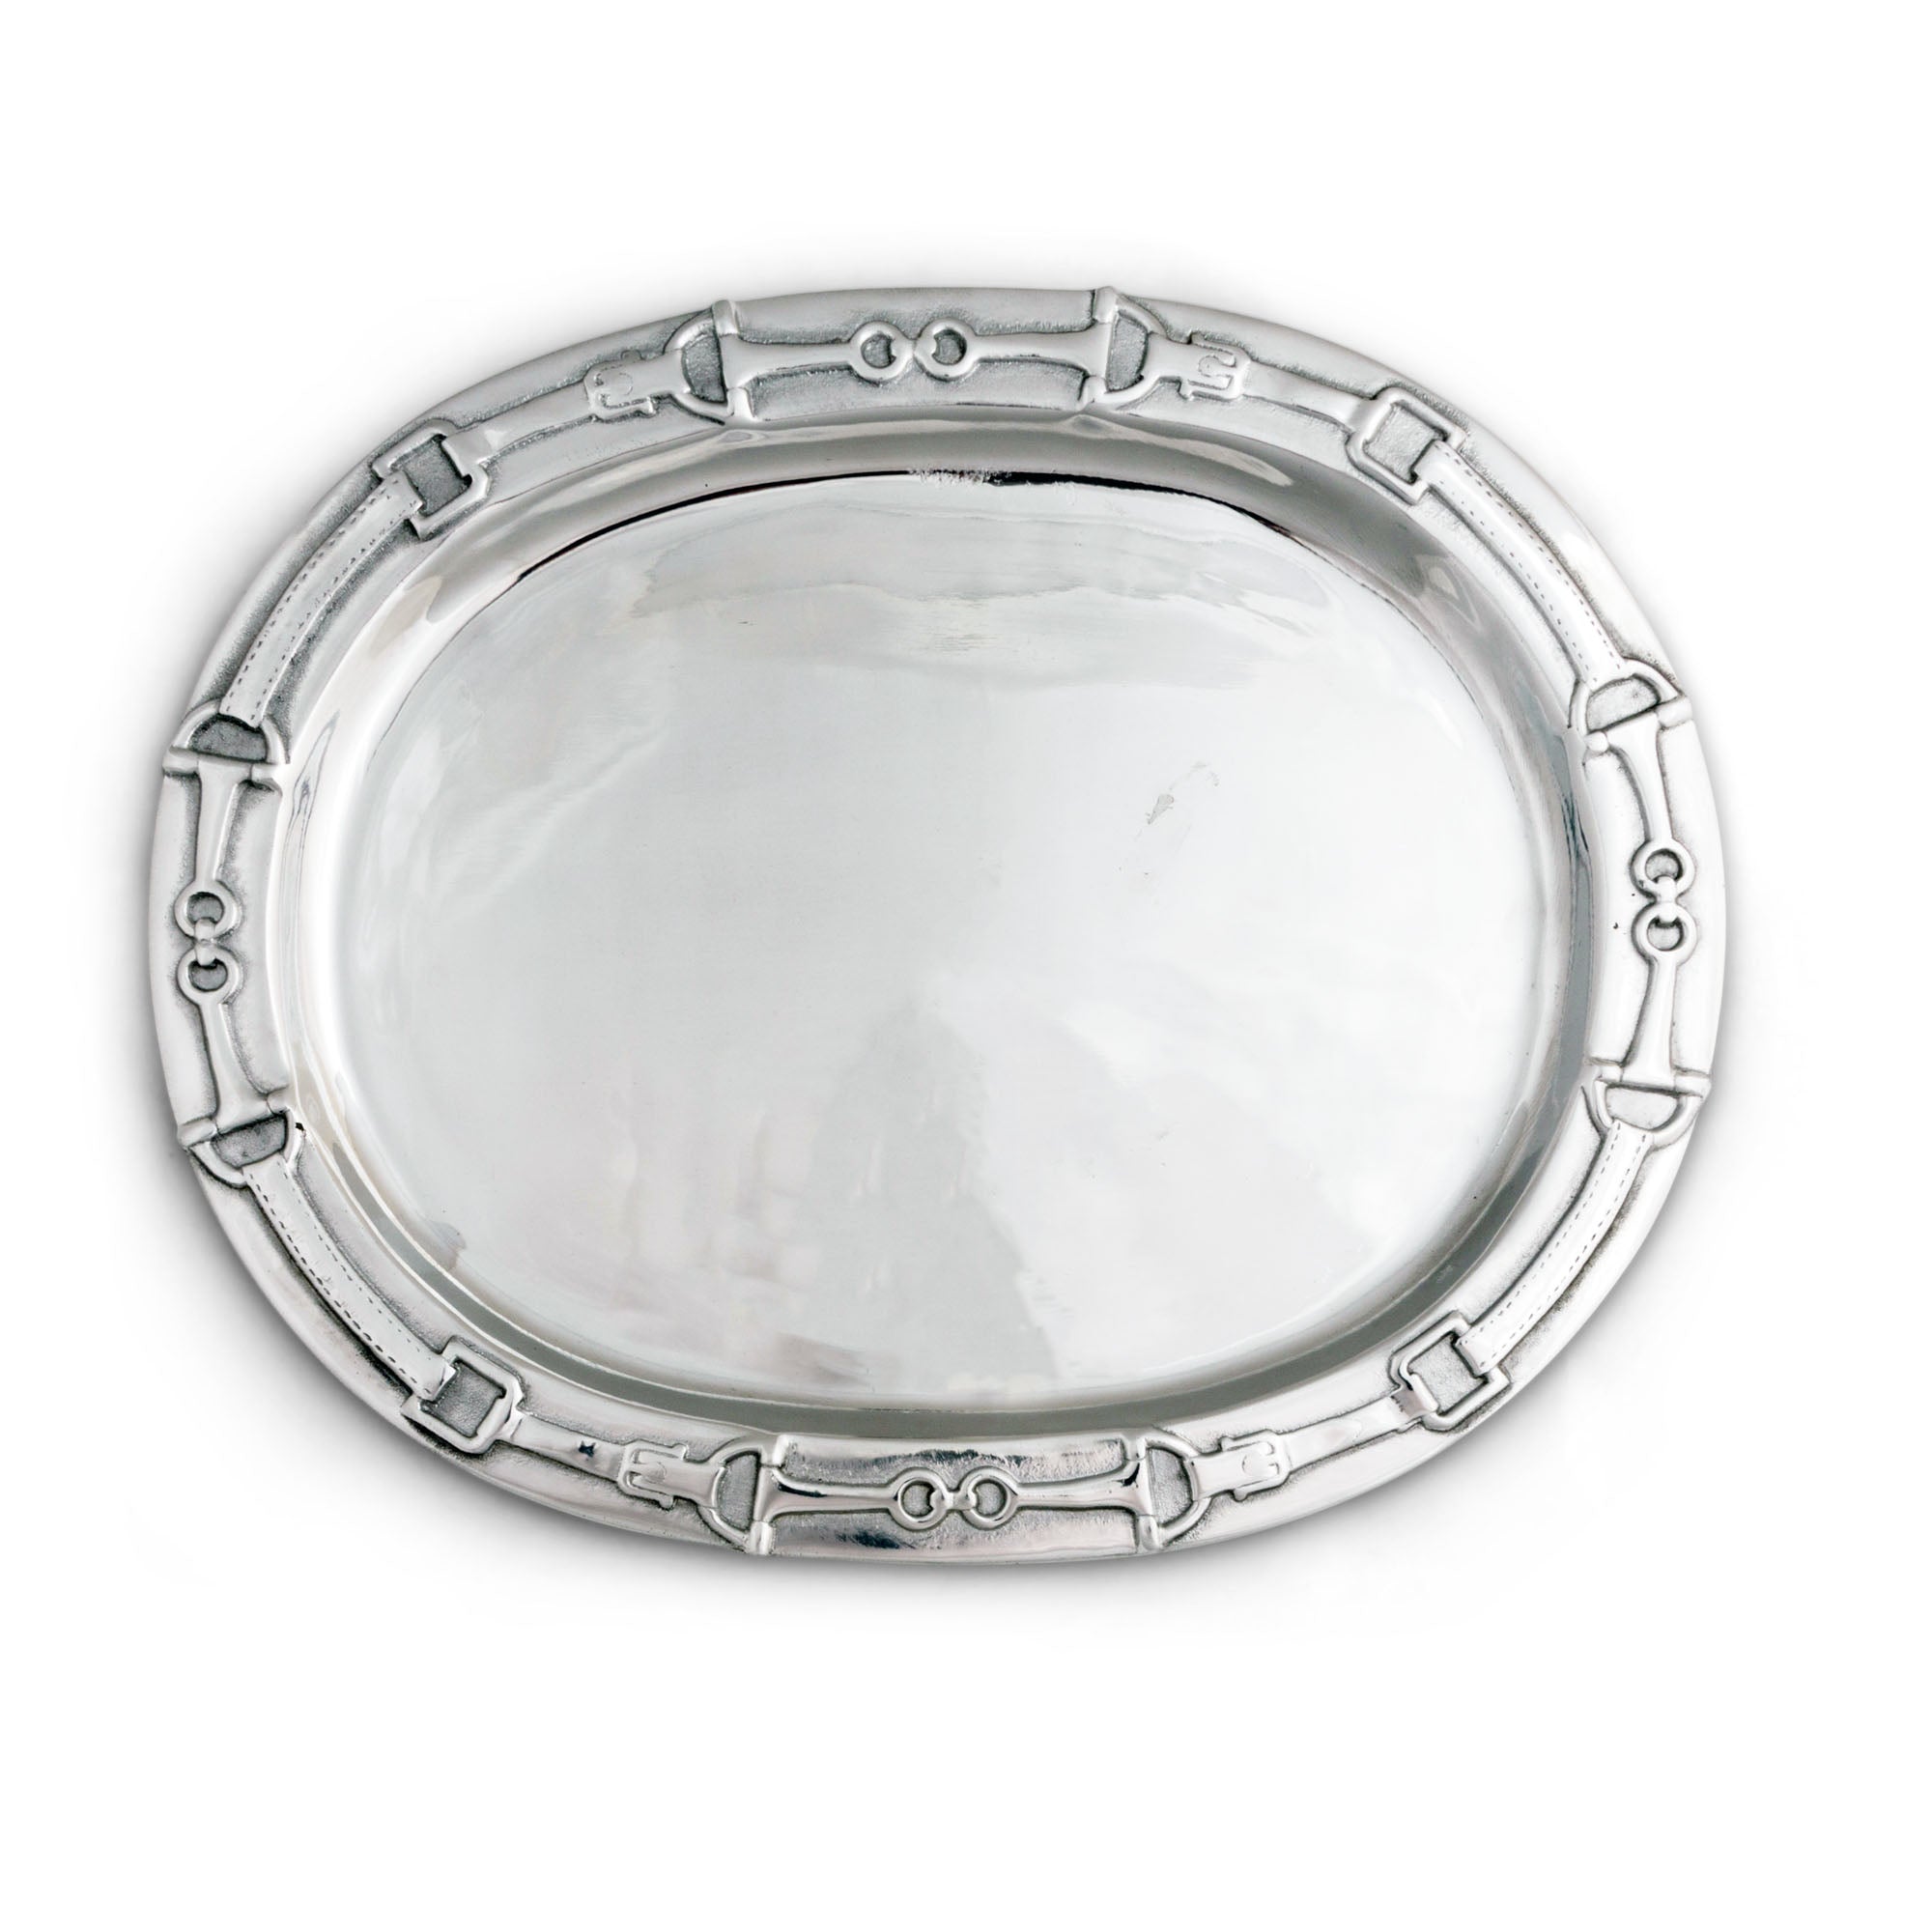 Arthur Court Equestrian Oval Platter Product Image